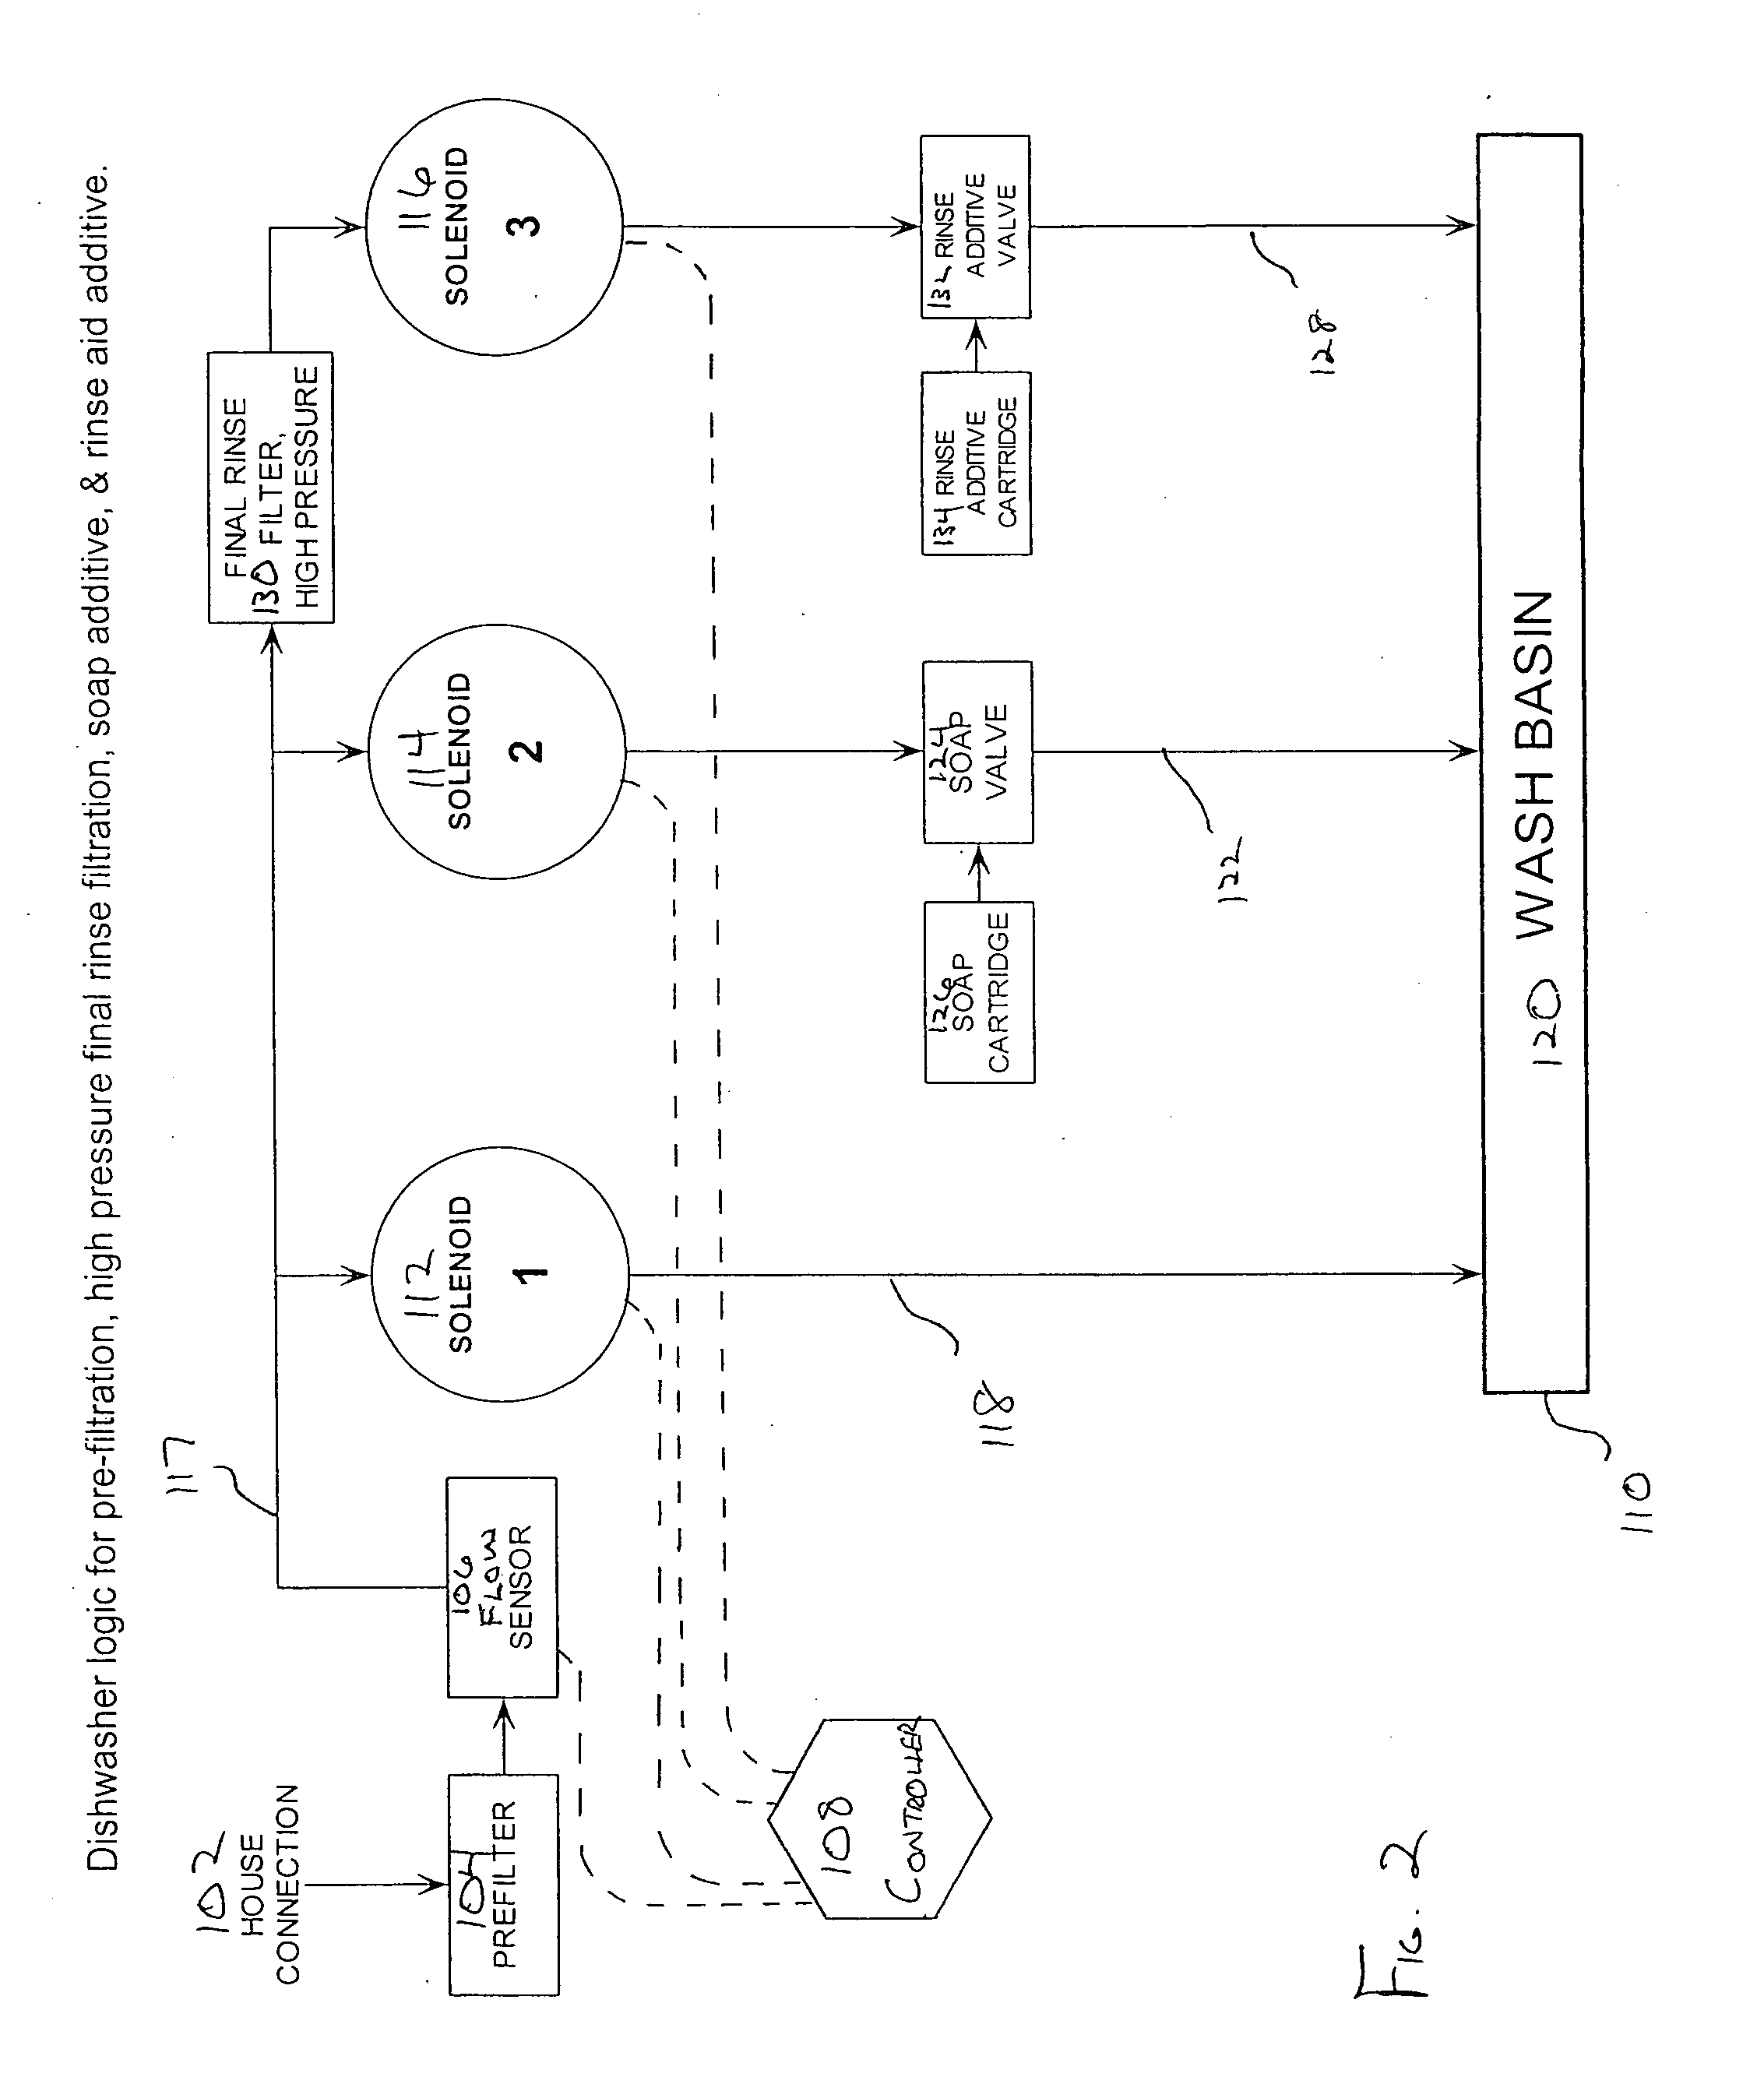 Fluid treatment system for use with a washing appliance